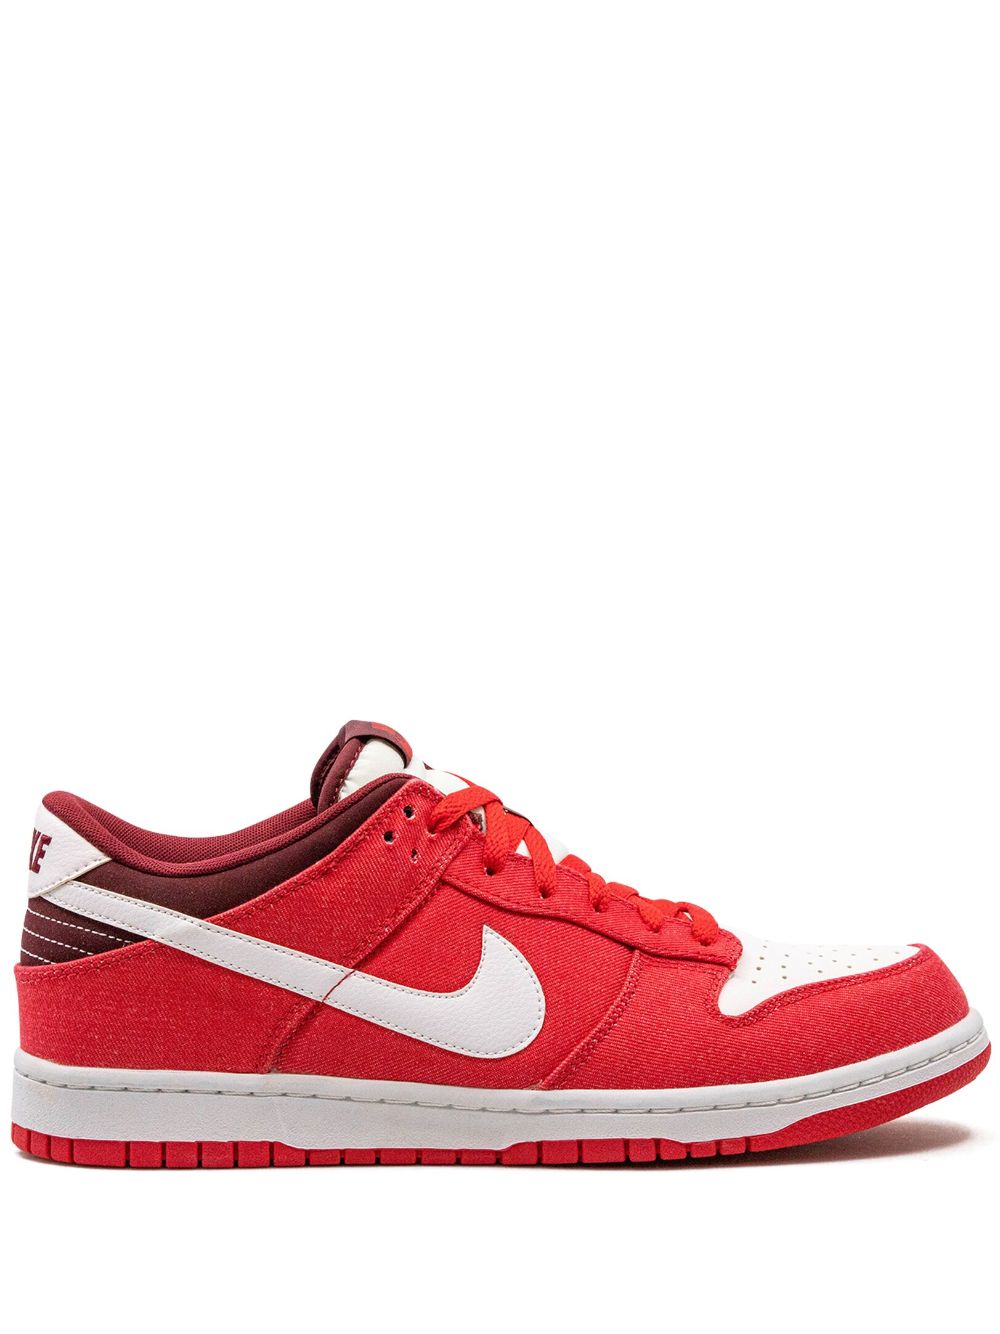 Nike Dunk Low "Hyper Red" sneakers von Nike